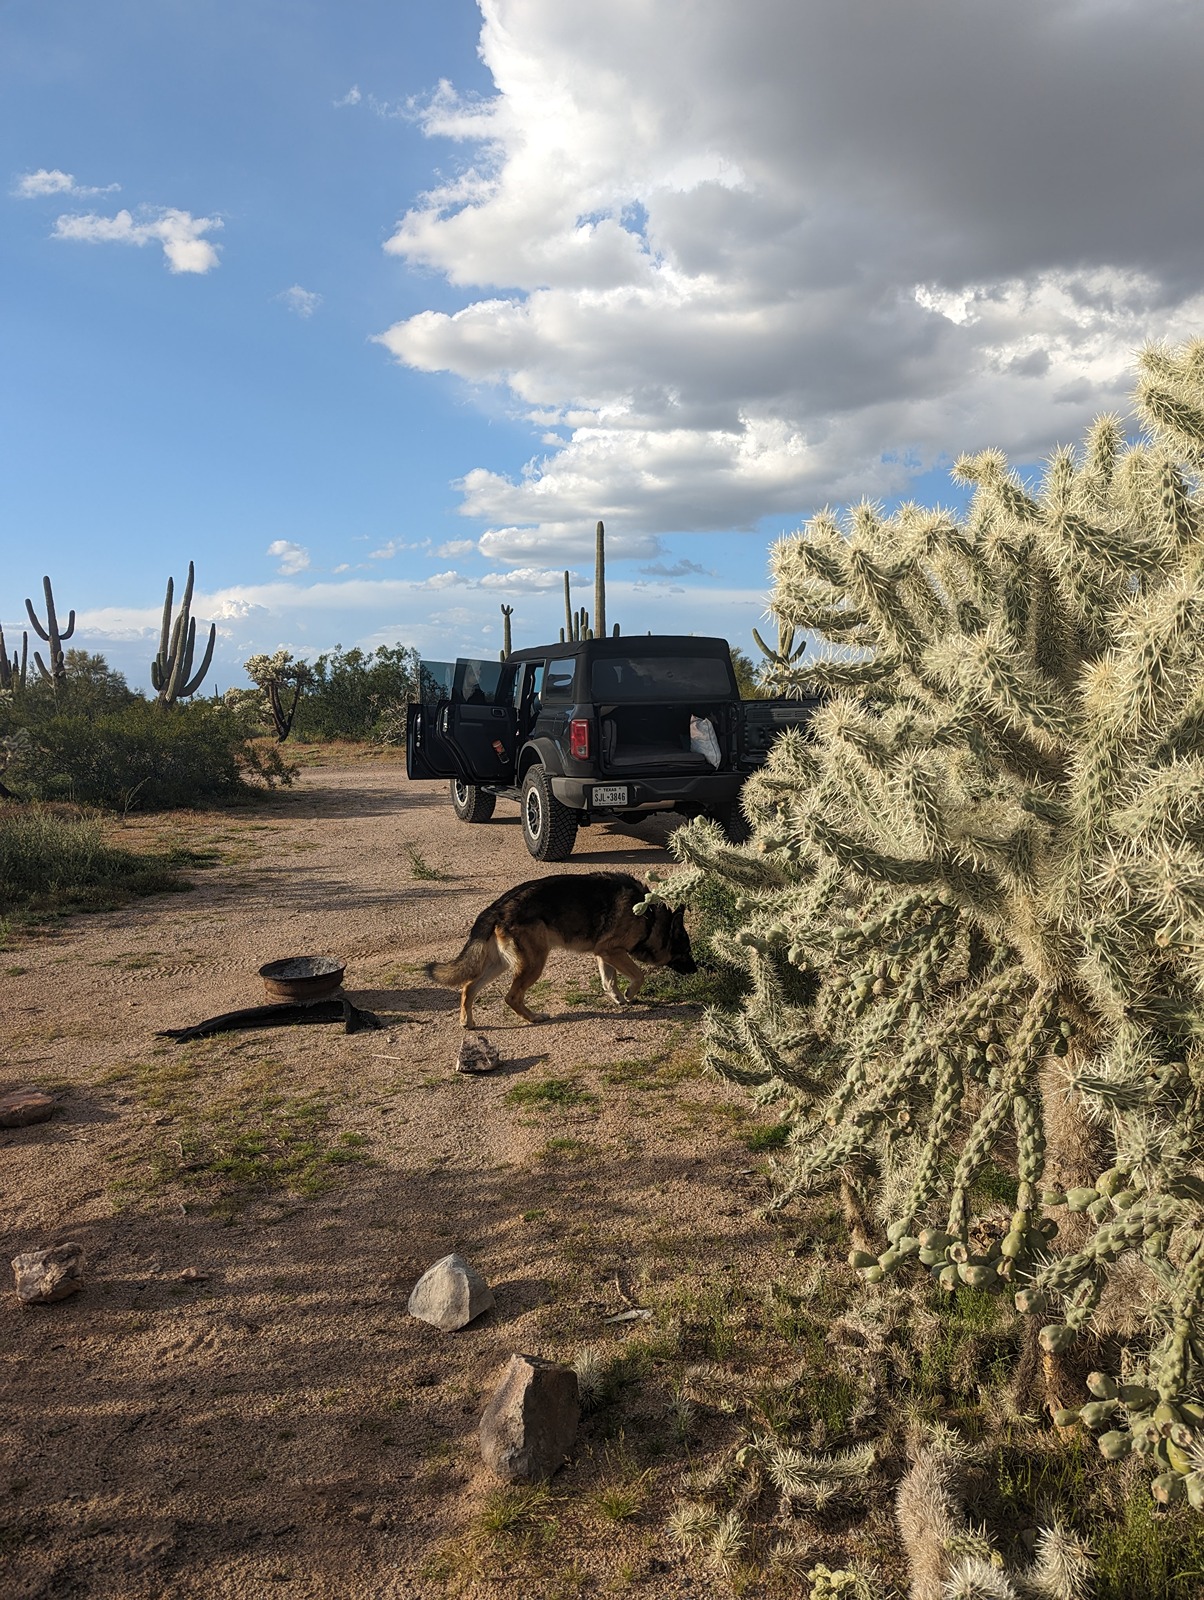 Ford Bronco Epic road trip, but had to say goodbye to my German Shepherd before we made it home BLM Near Tuscon